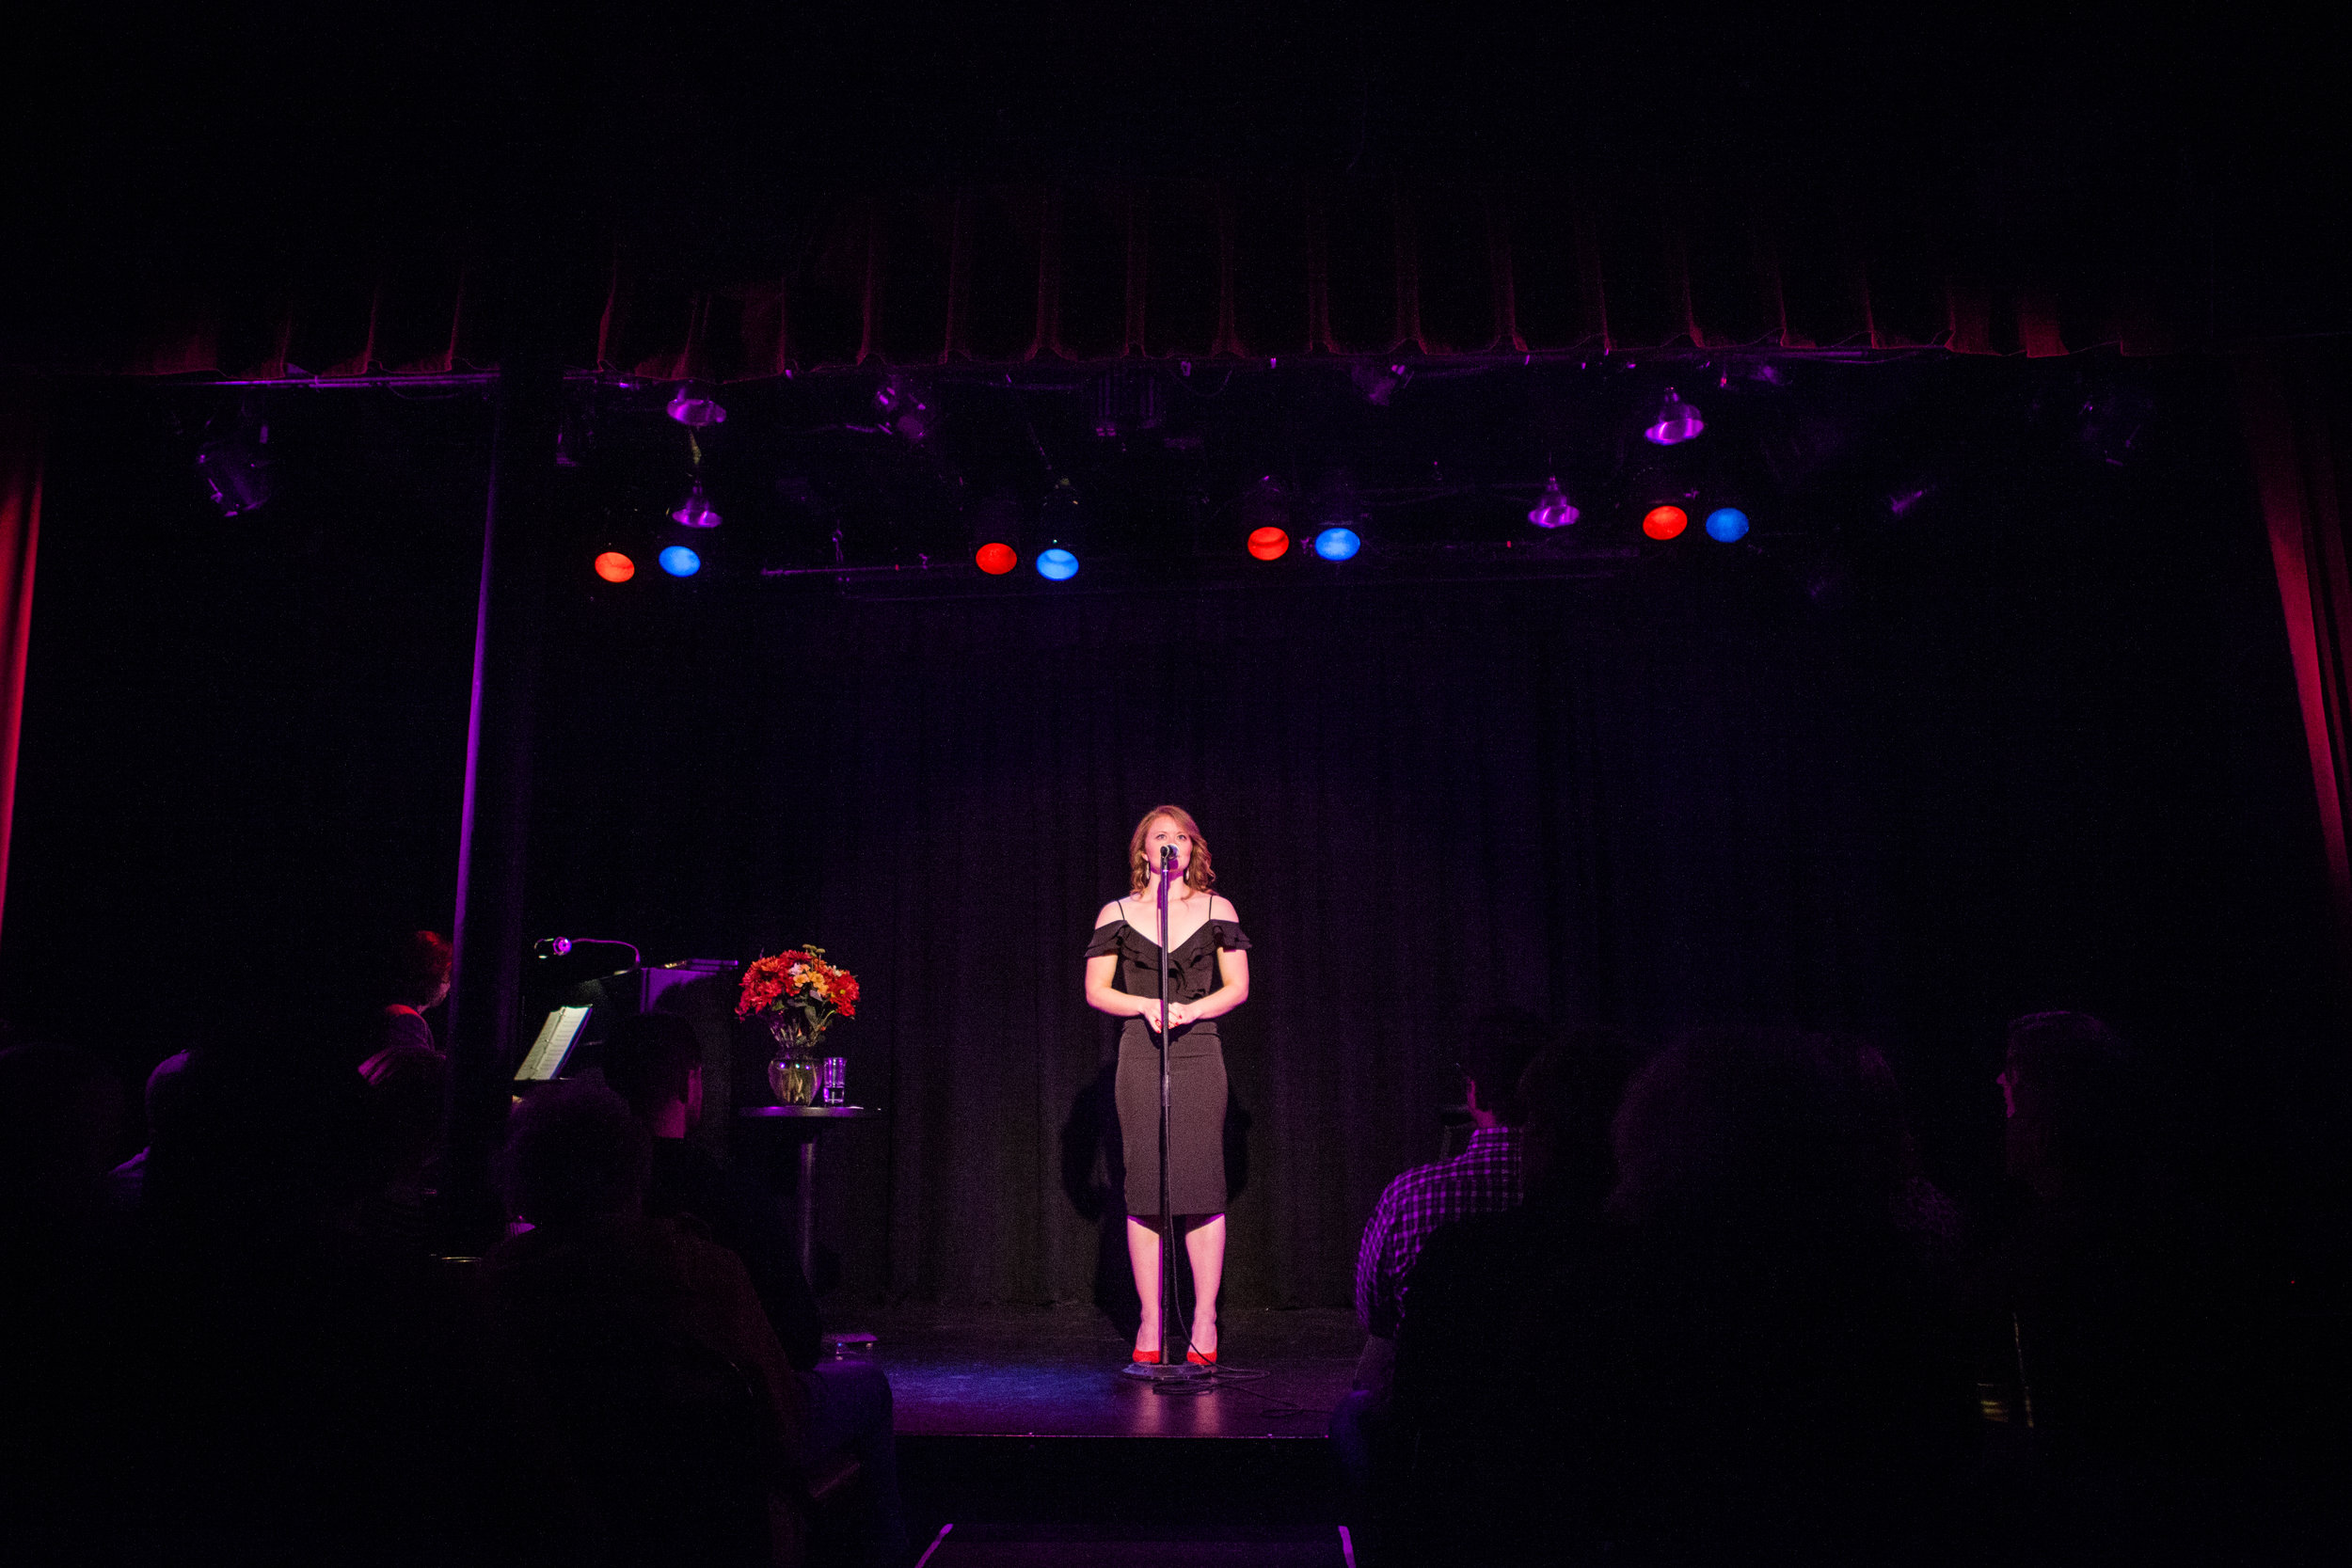   What Would Judy Do?  Solo cabaret at Bryant-Lake Bowl &amp; Theatre Minneapolis, MN October 2, 2018  Photography by Gabe Stejskal 